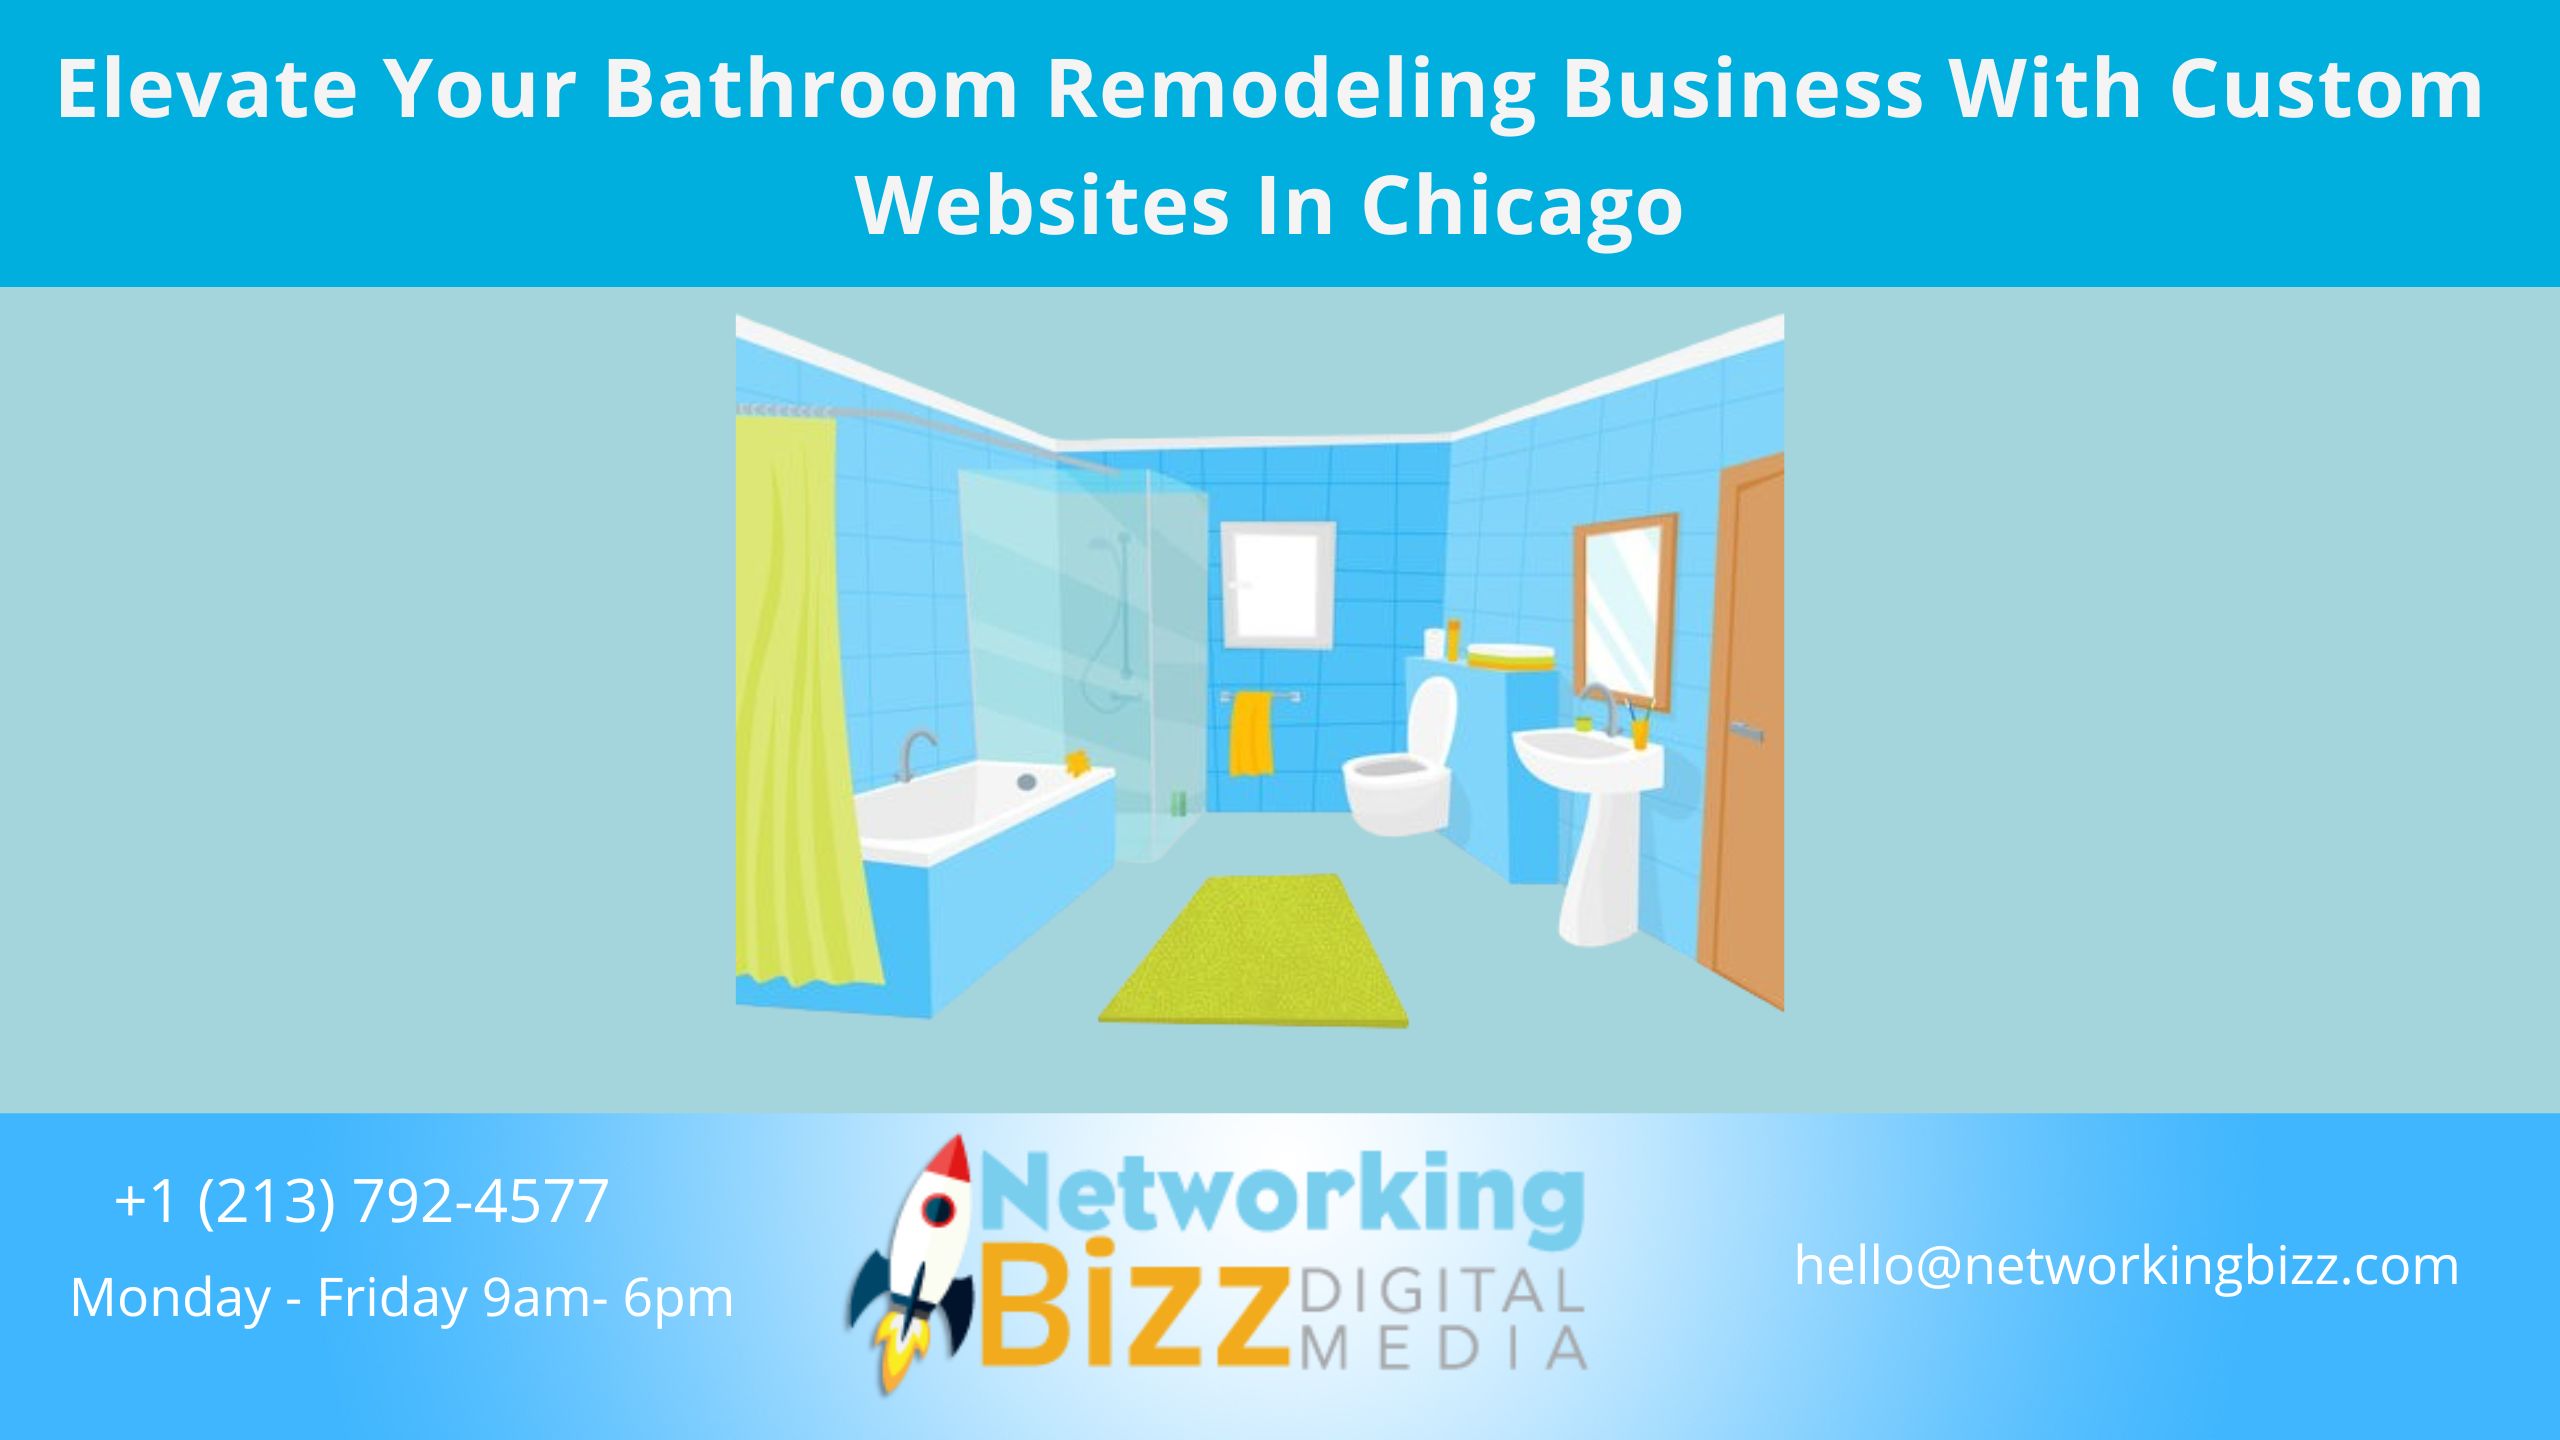 Elevate Your Bathroom Remodeling Business With Custom Websites In Chicago